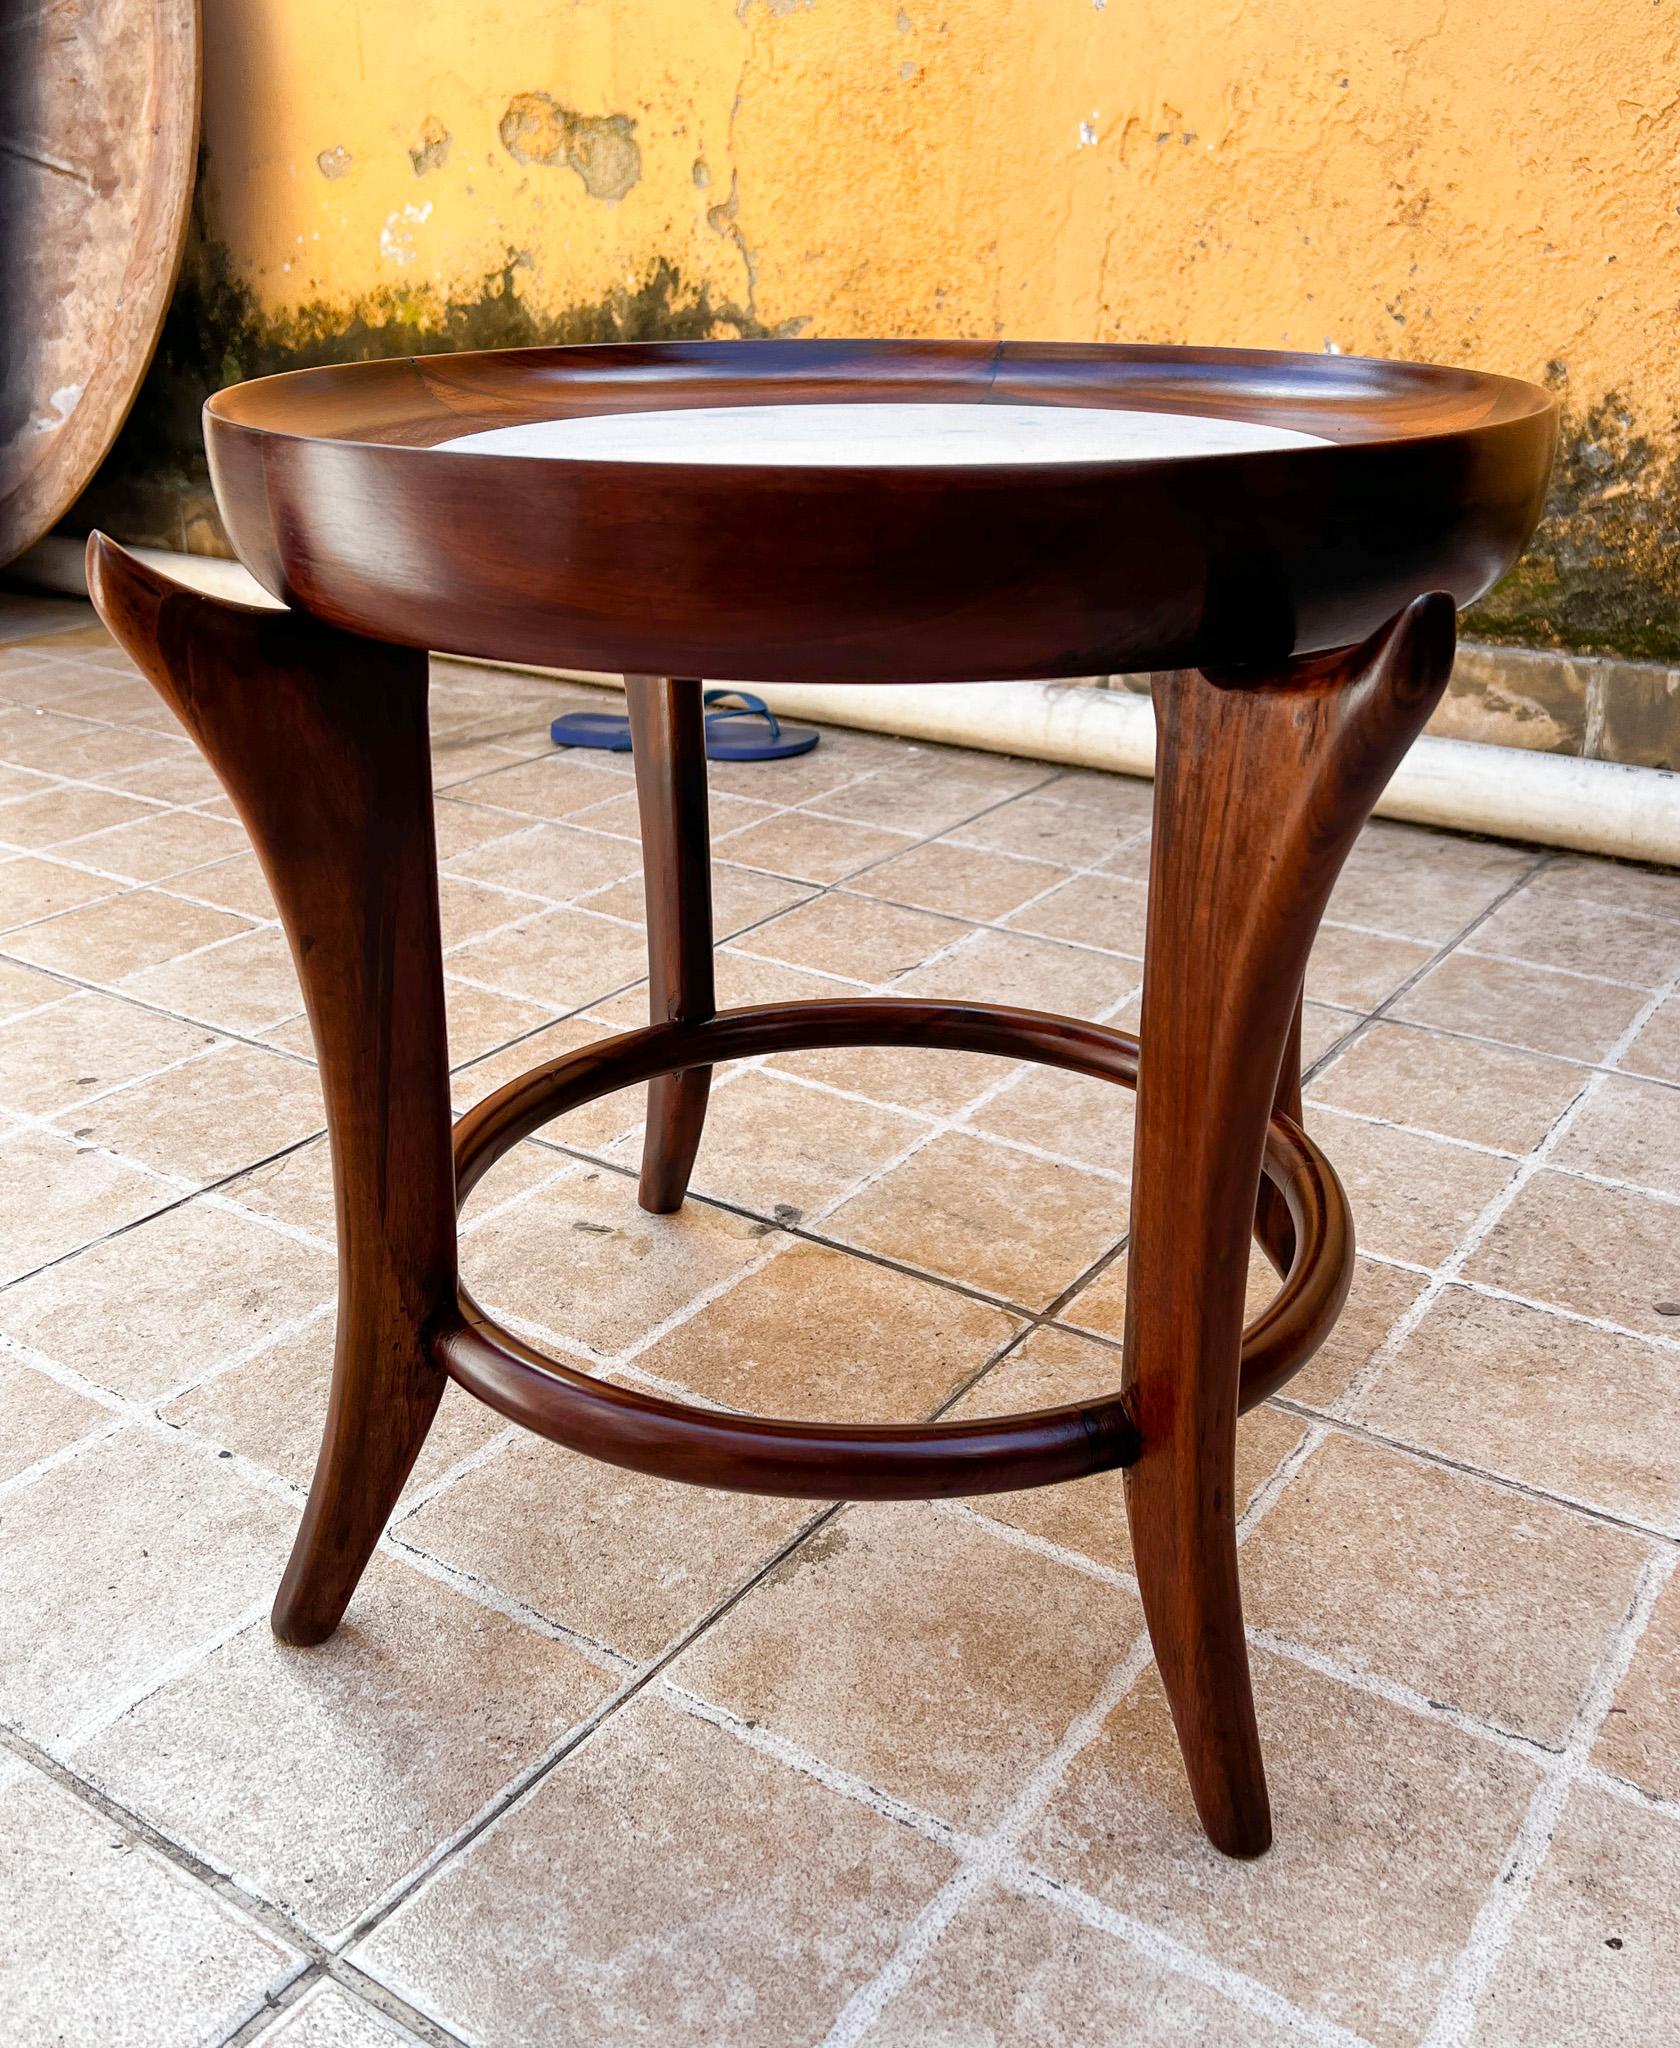 Hand-Crafted Midcentury Modern Side Table in Hardwood & Marble by Giuseppe Scapinelli, 1950's